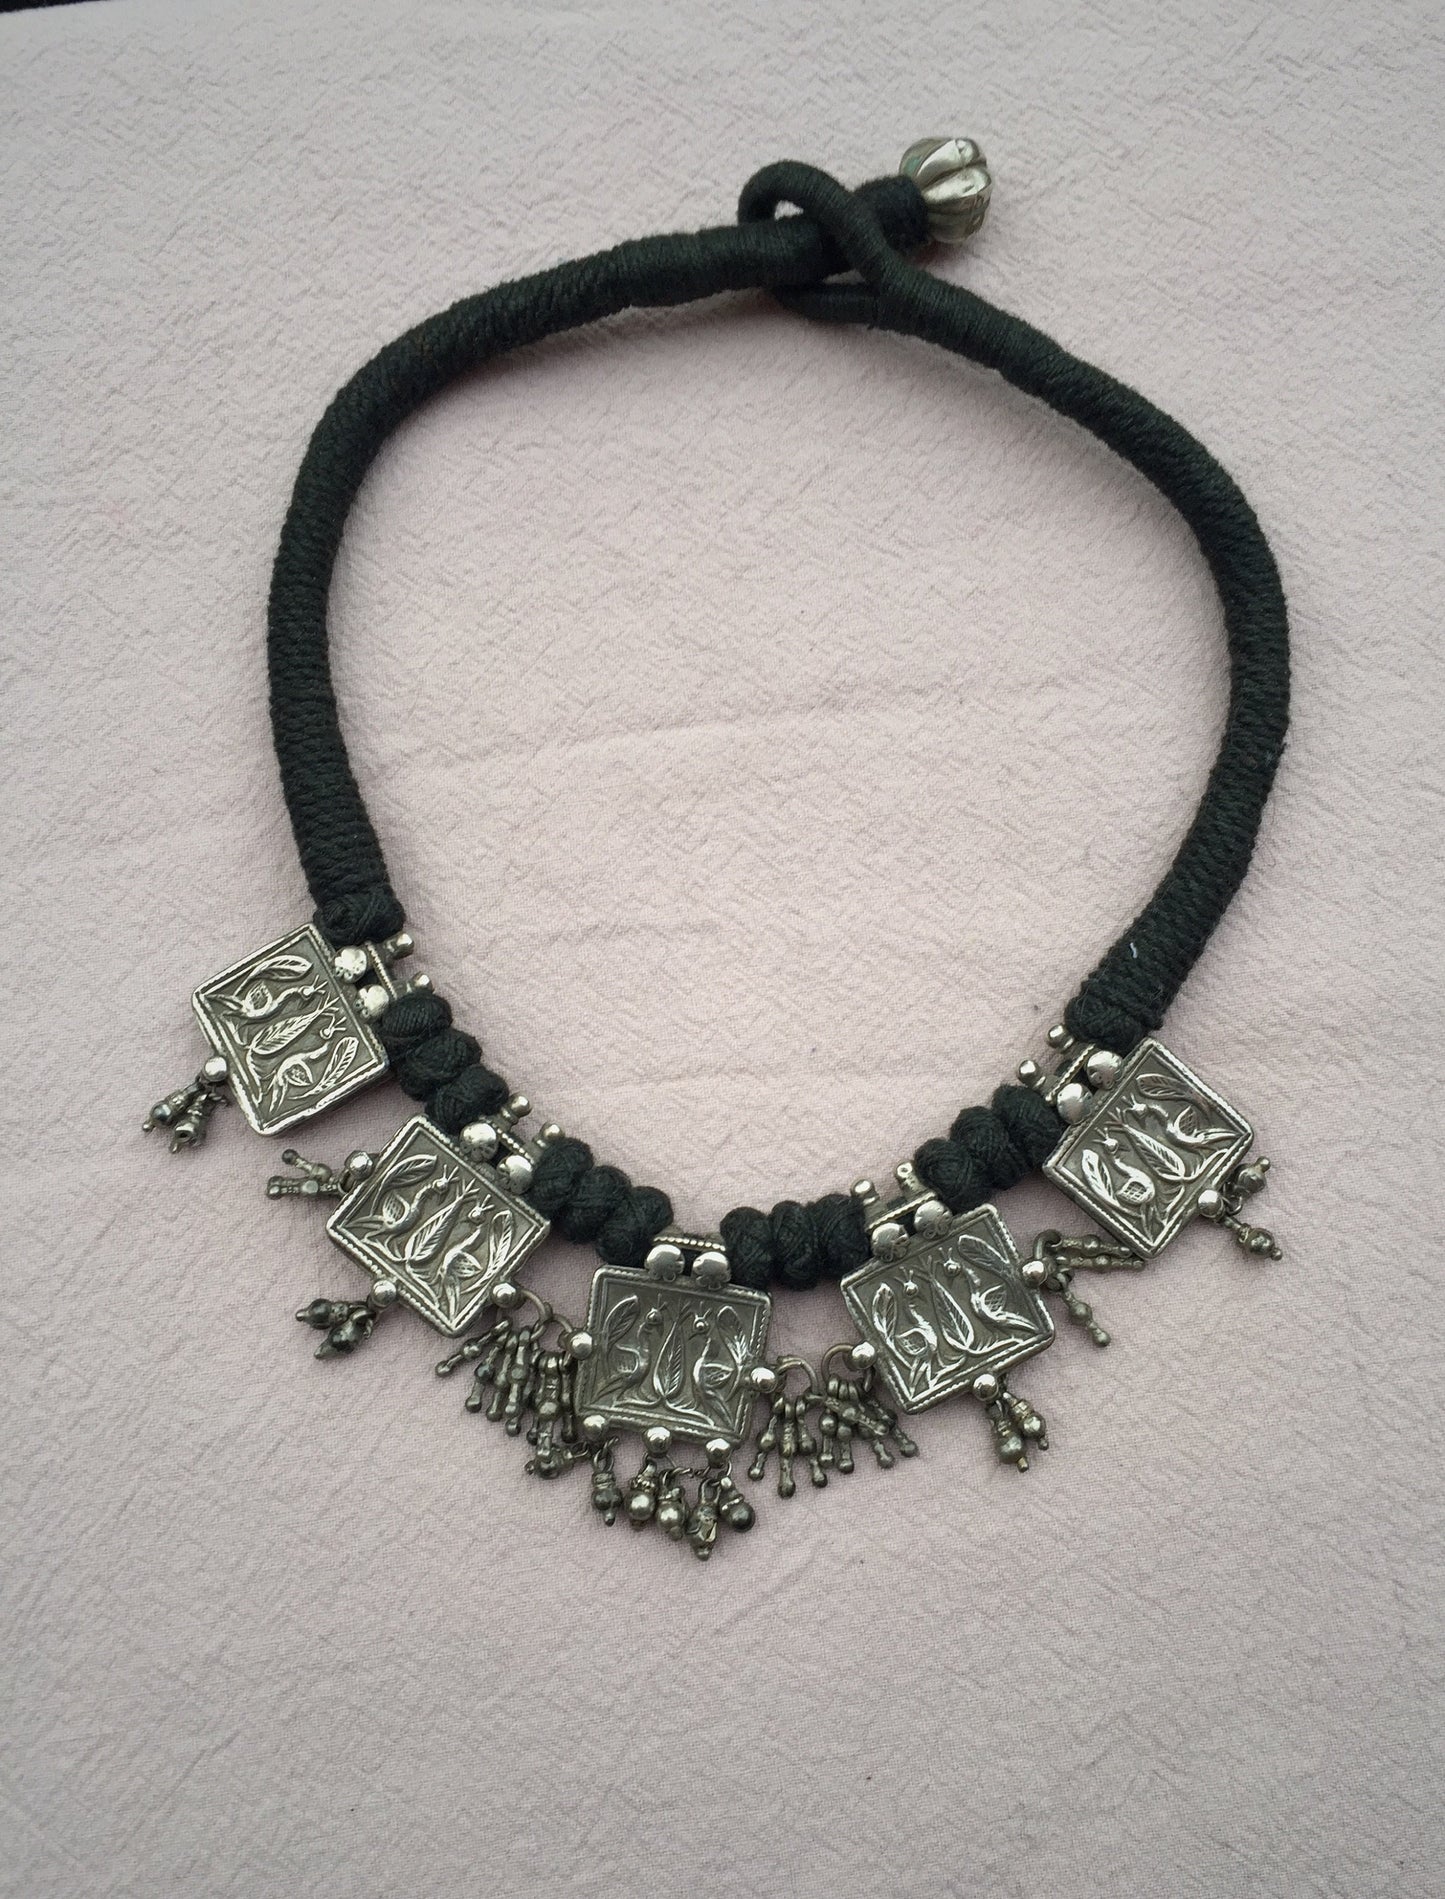 Vintage silver PEACOCK necklace from gypsy tribes of Rajasthan India